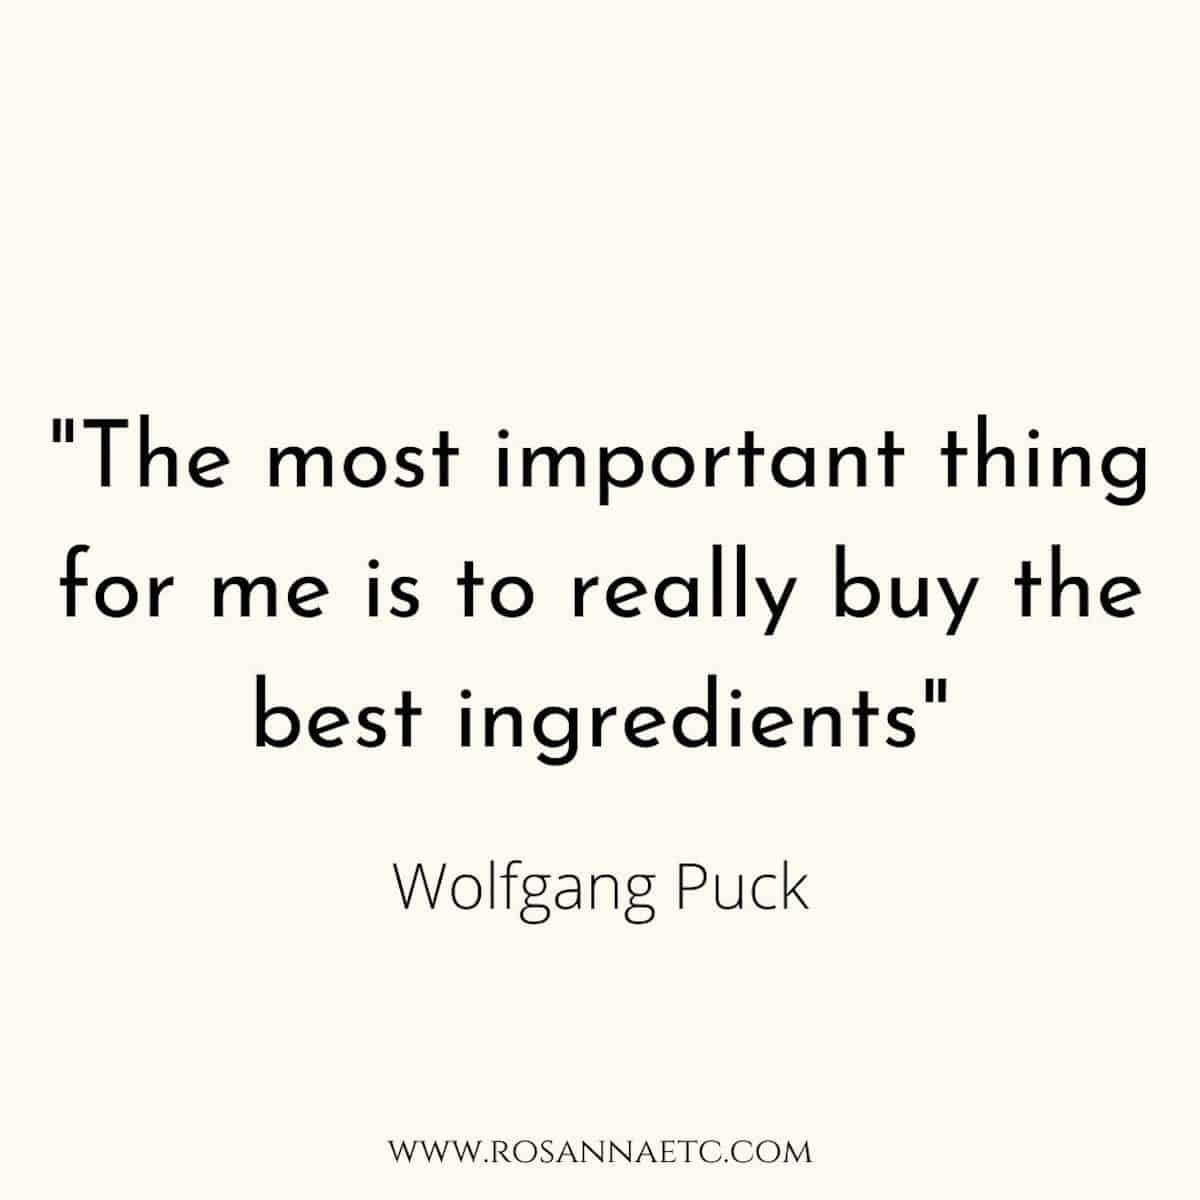 A quote that reads "The most important thing for me is to really buy the best ingredients" by Wolfgang Puck